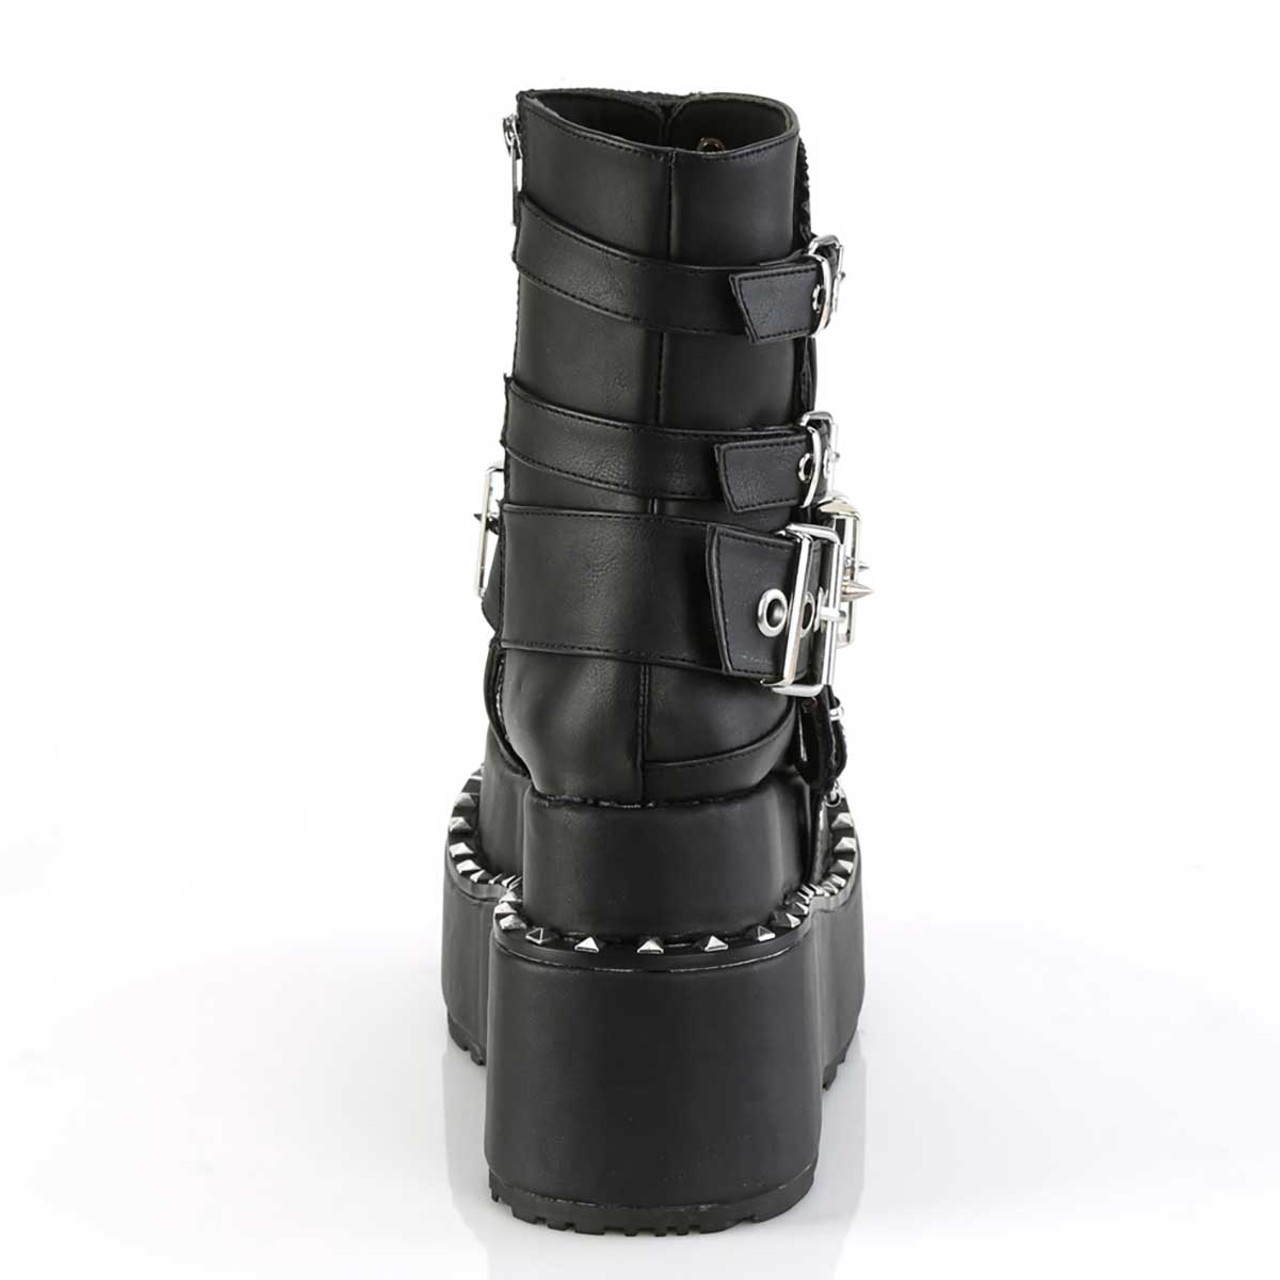 BEAR-150, Tiered Pyramid Studs Platform With Skull Patch Boots By 